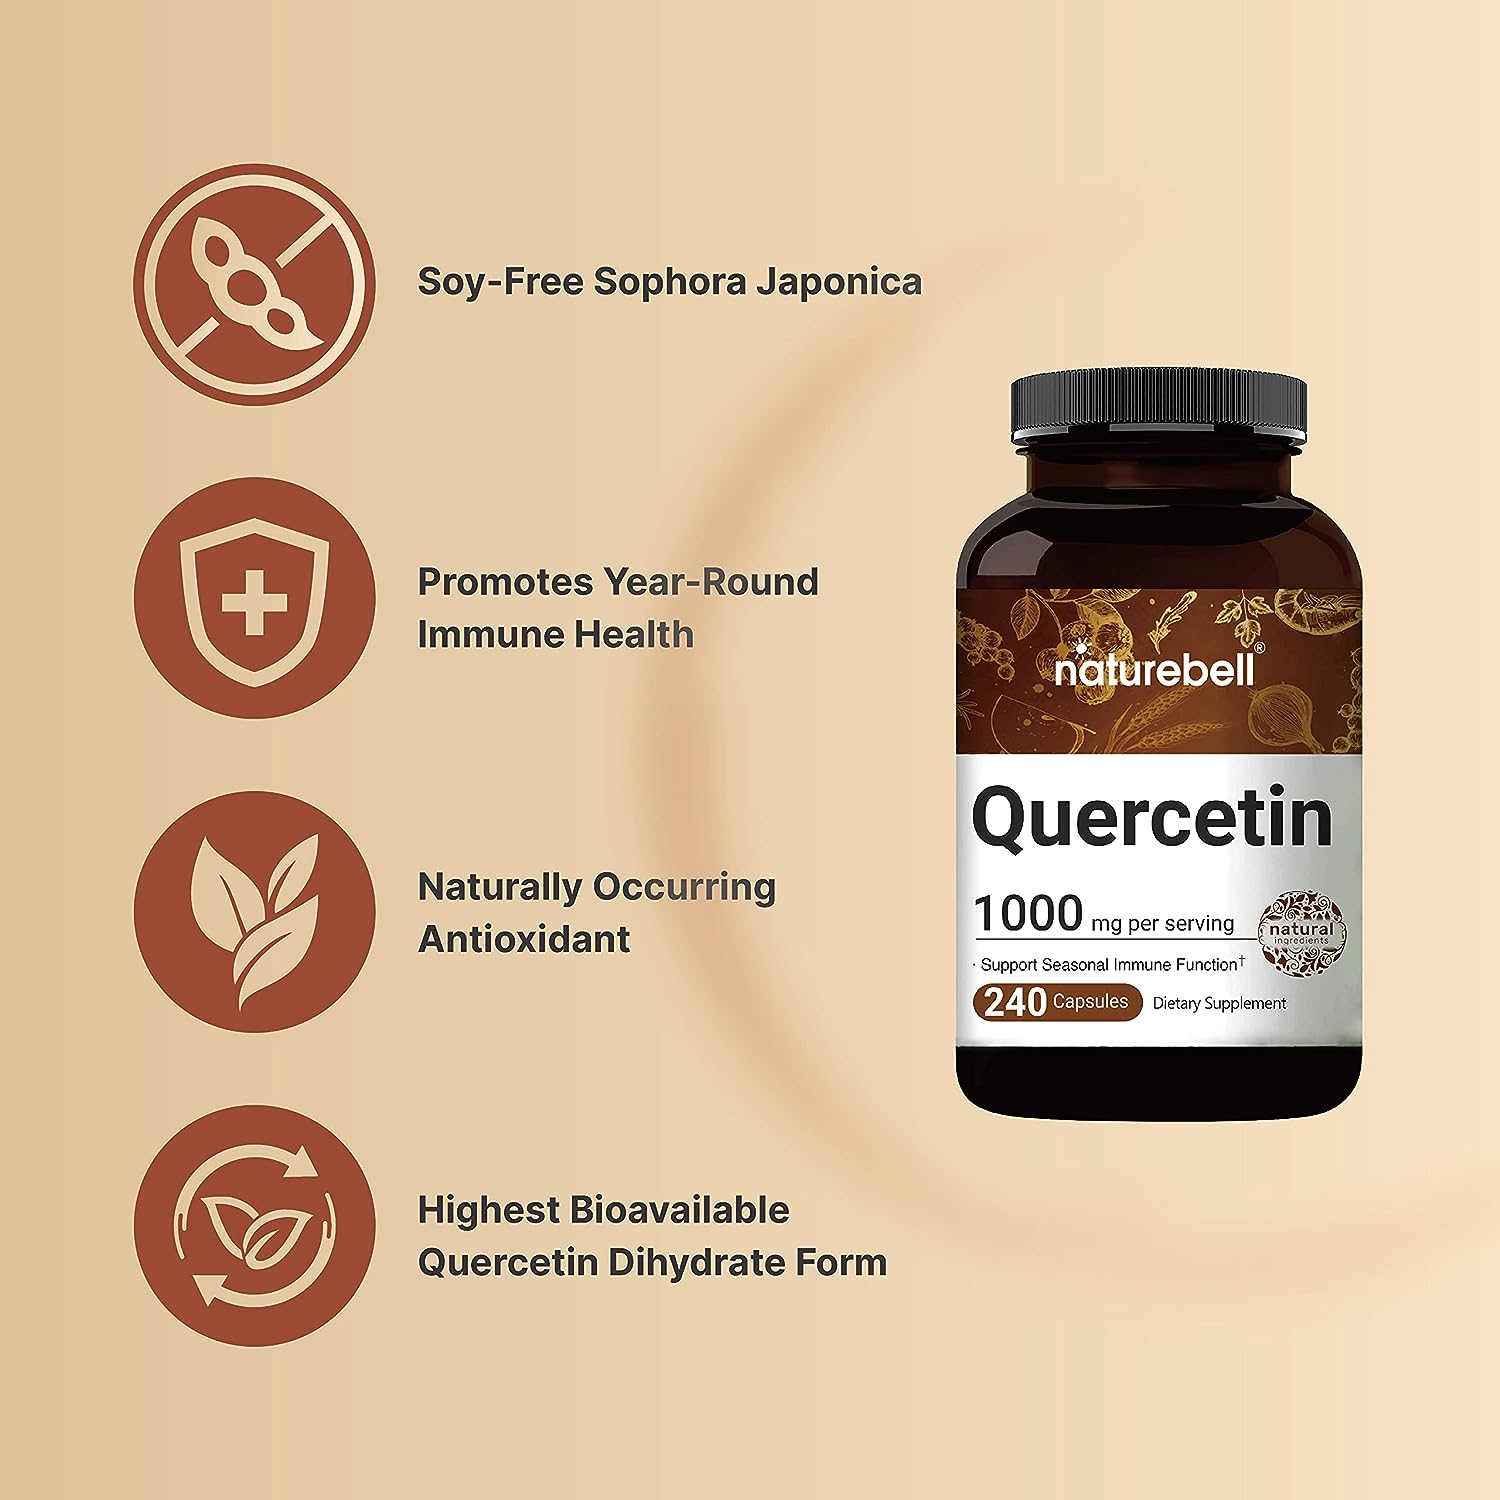 NatureBell Quercetin 1000mg Per Serving | 240 Capsules, Ultra Strength Quercetin Supplement | Bioflavonoids for Healthy Immune Support, Third Party Tested, Non-GMO  No Gluten